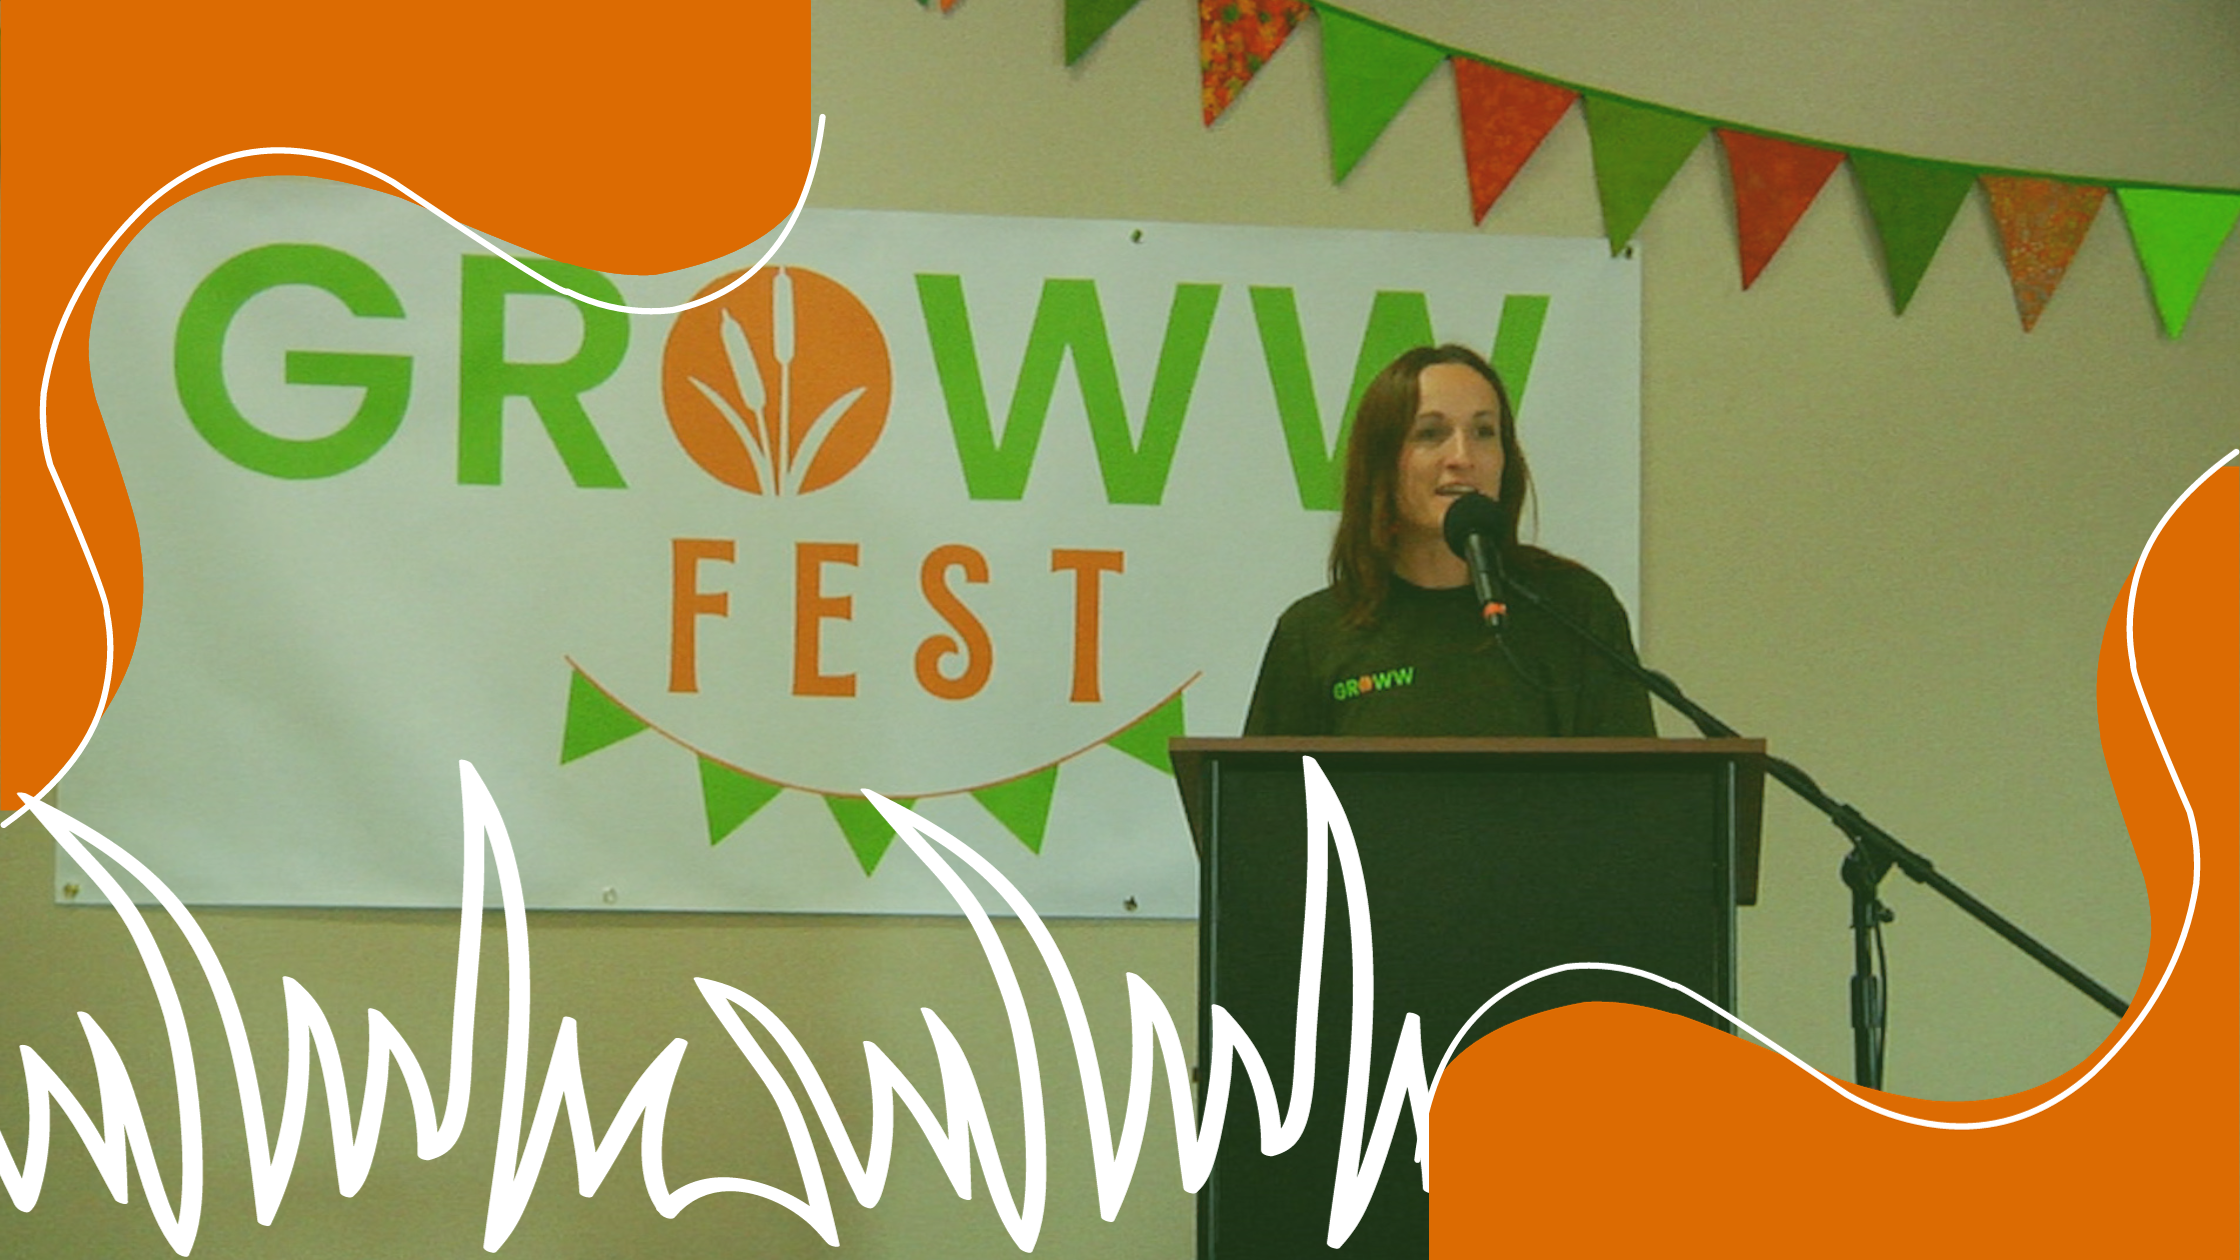 Samantha Bowen of the People Protecting Pierce campaign shares her story at GROWW Fest, in front of the GROWW Fest banner.